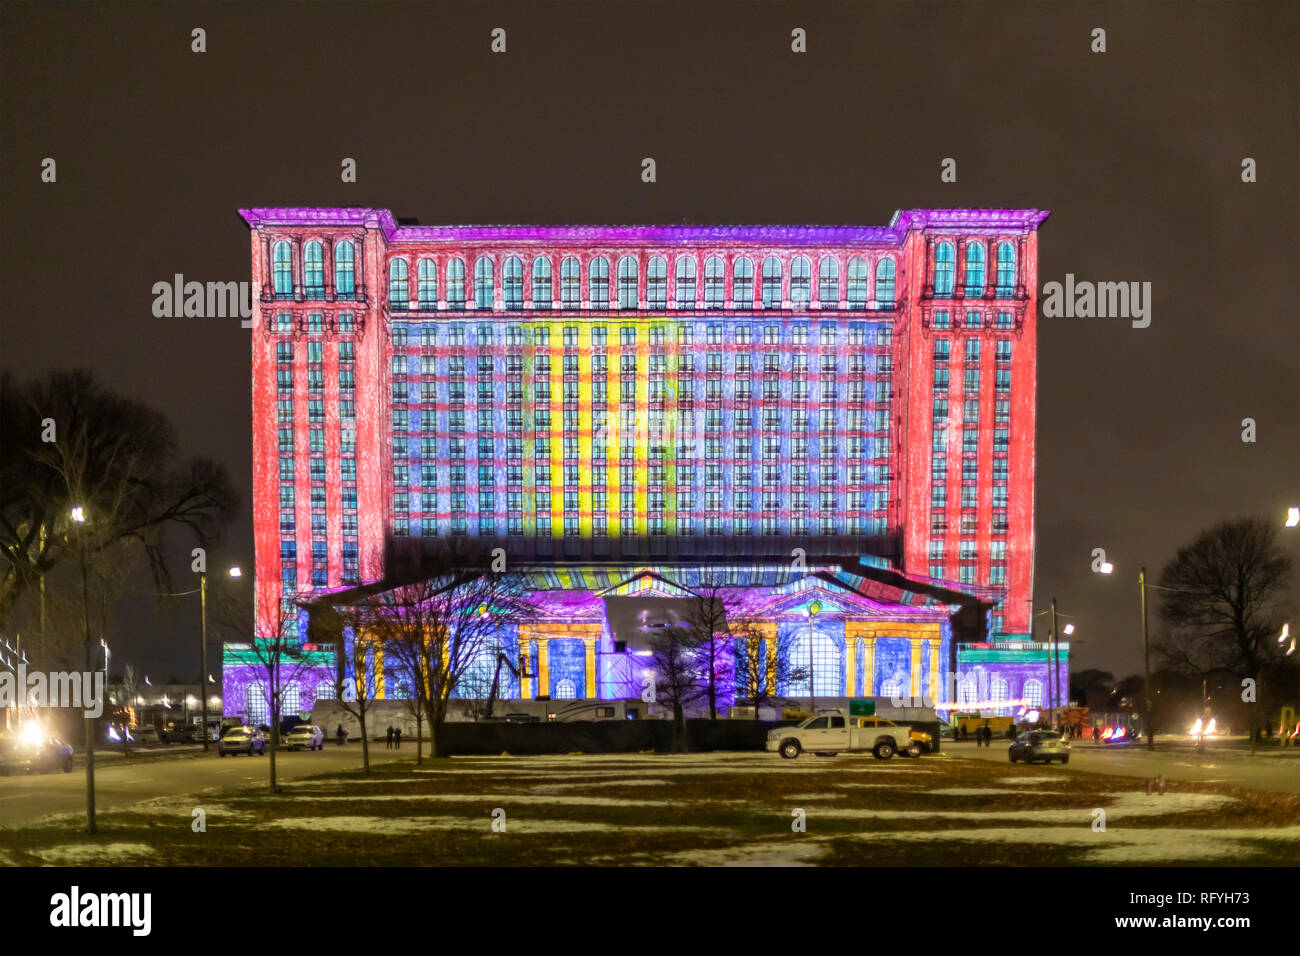 Detroit, Michigan - Ford Motor Company projected a light show on the Michigan Central railroad station during a Winter Festival. Ford bought the long- Stock Photo